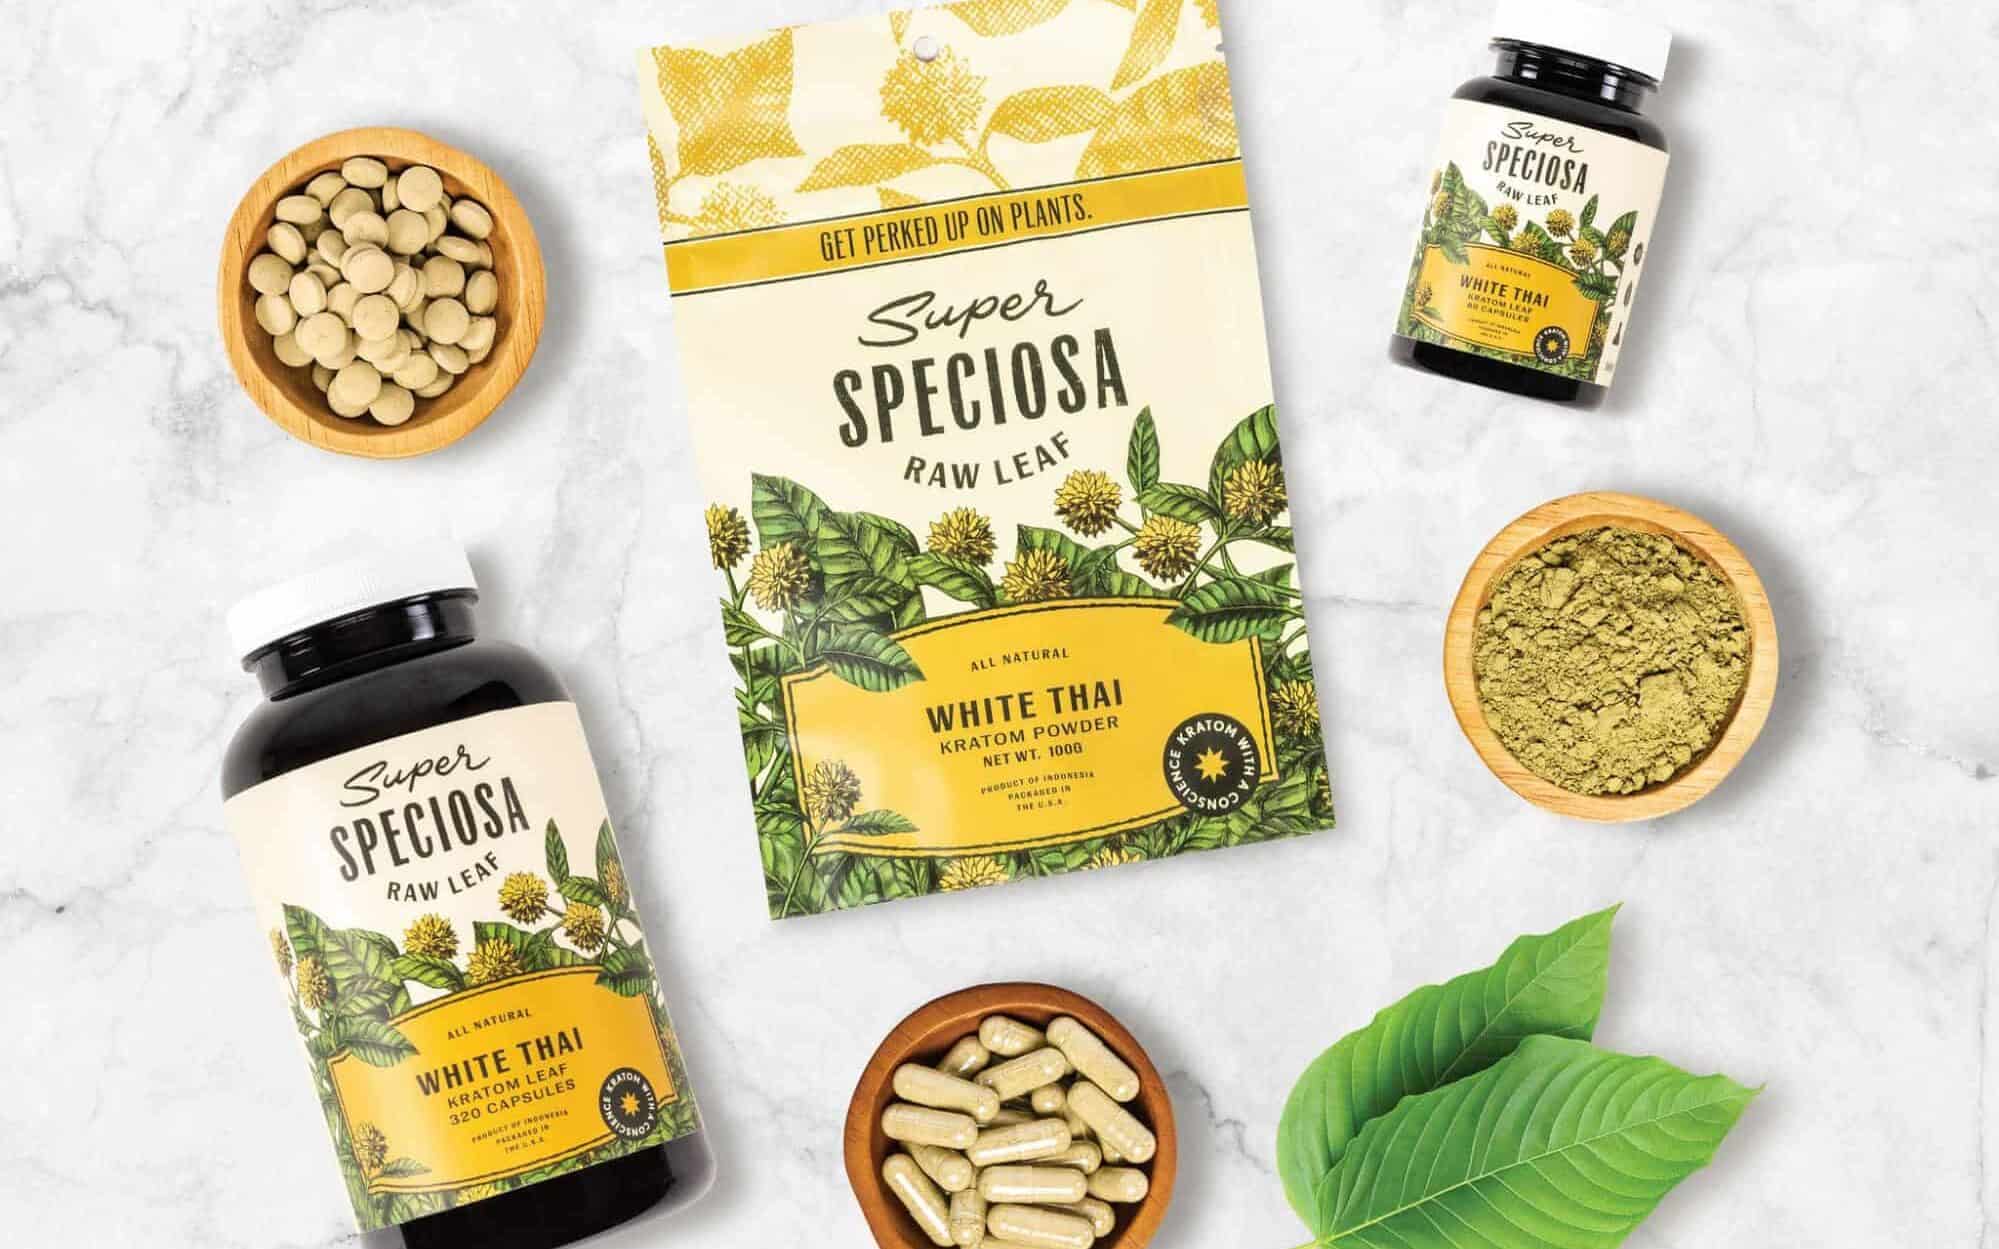 Super Speciosa’s array of different White Thai kratom products, such as kratom tablets, kratom capsules, and kratom powder.